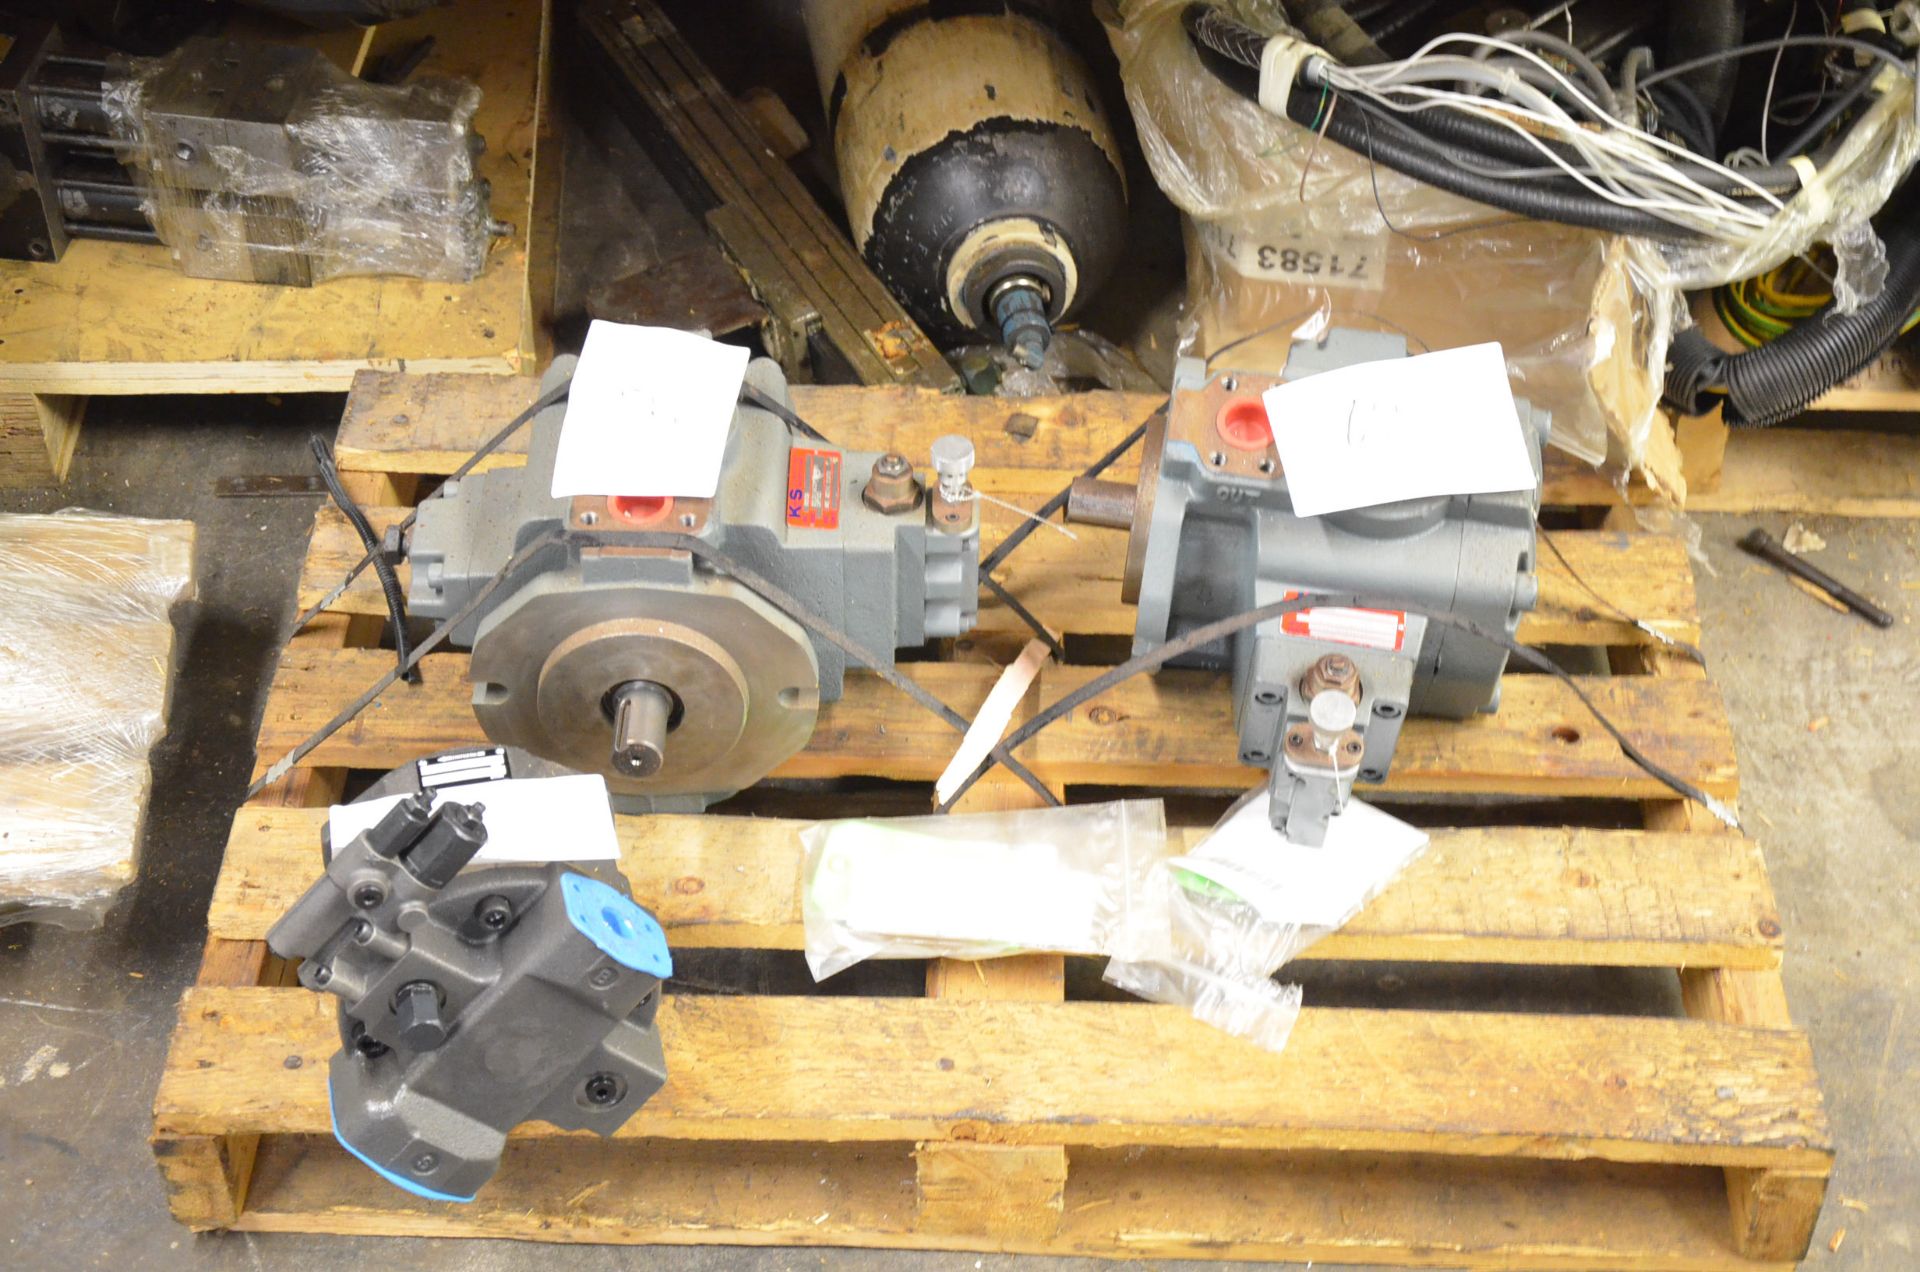 LOT/ RACK WITH SPARE ELECTRIC MOTORS, PUMPS AND PARTS - Image 2 of 10